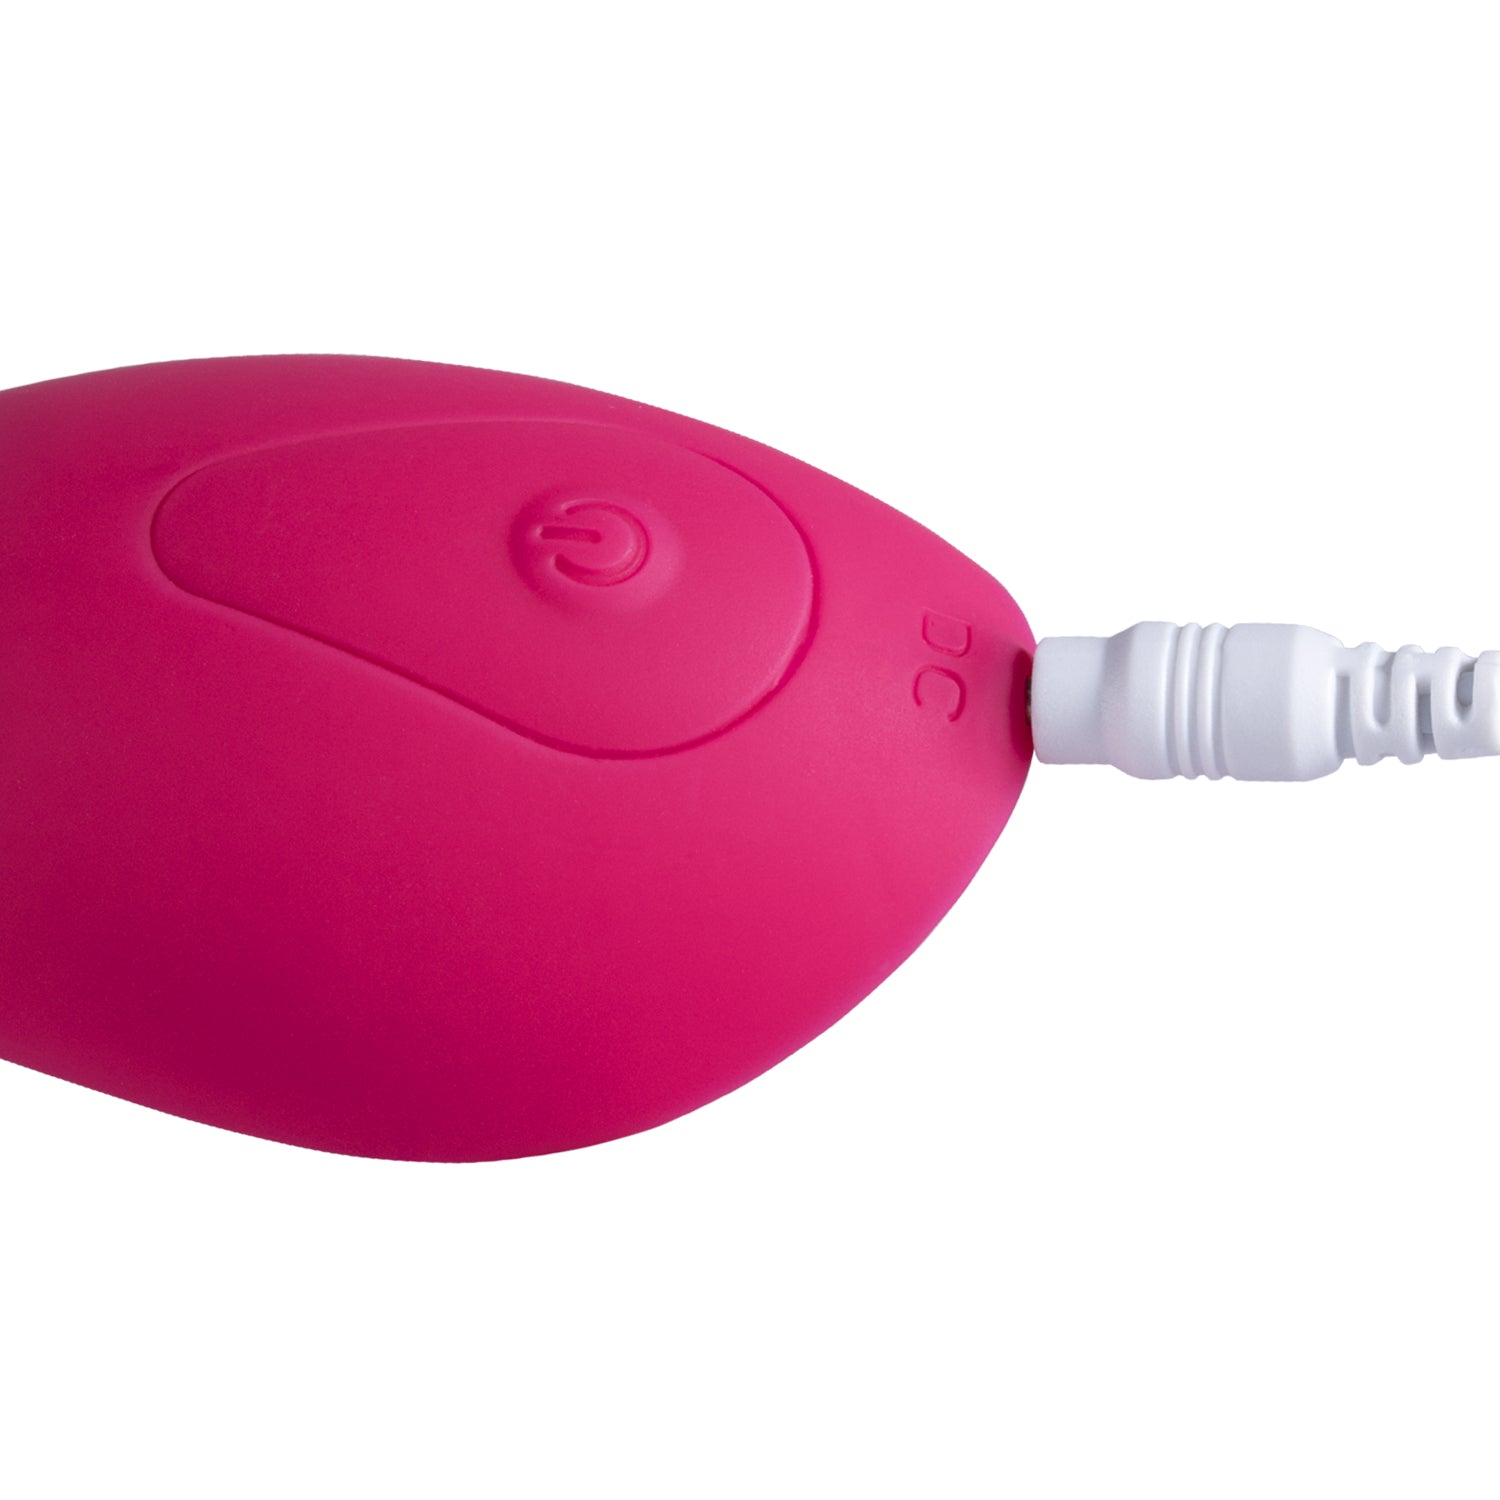 wearable panty vibrator remote control